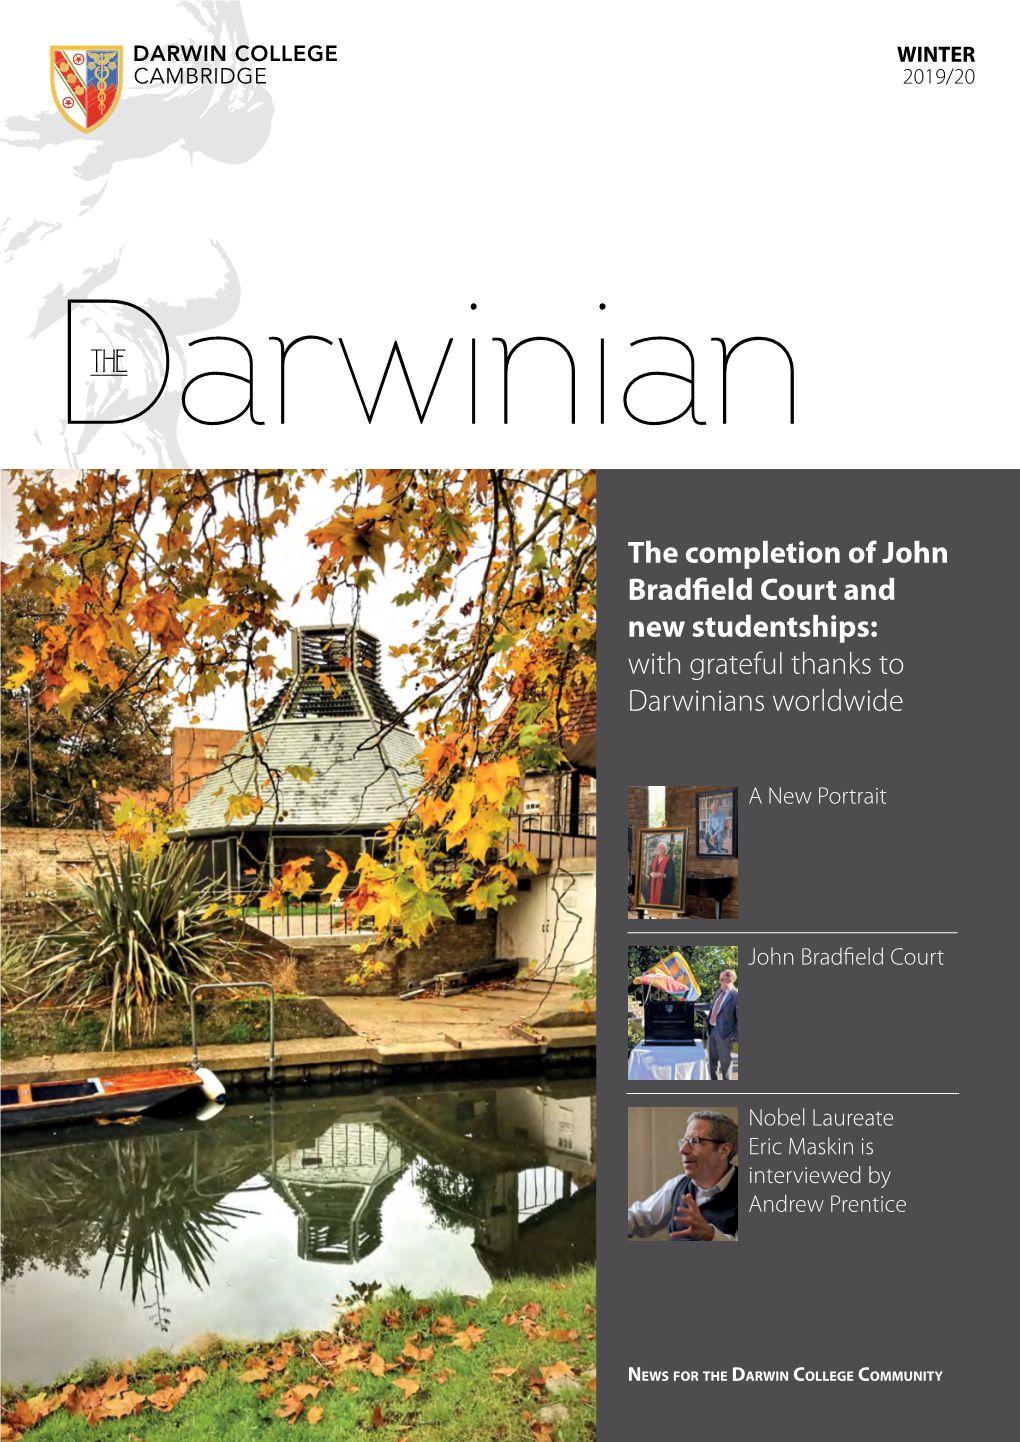 The Completion of John Bradfield Court and New Studentships: with Grateful Thanks to Darwinians Worldwide